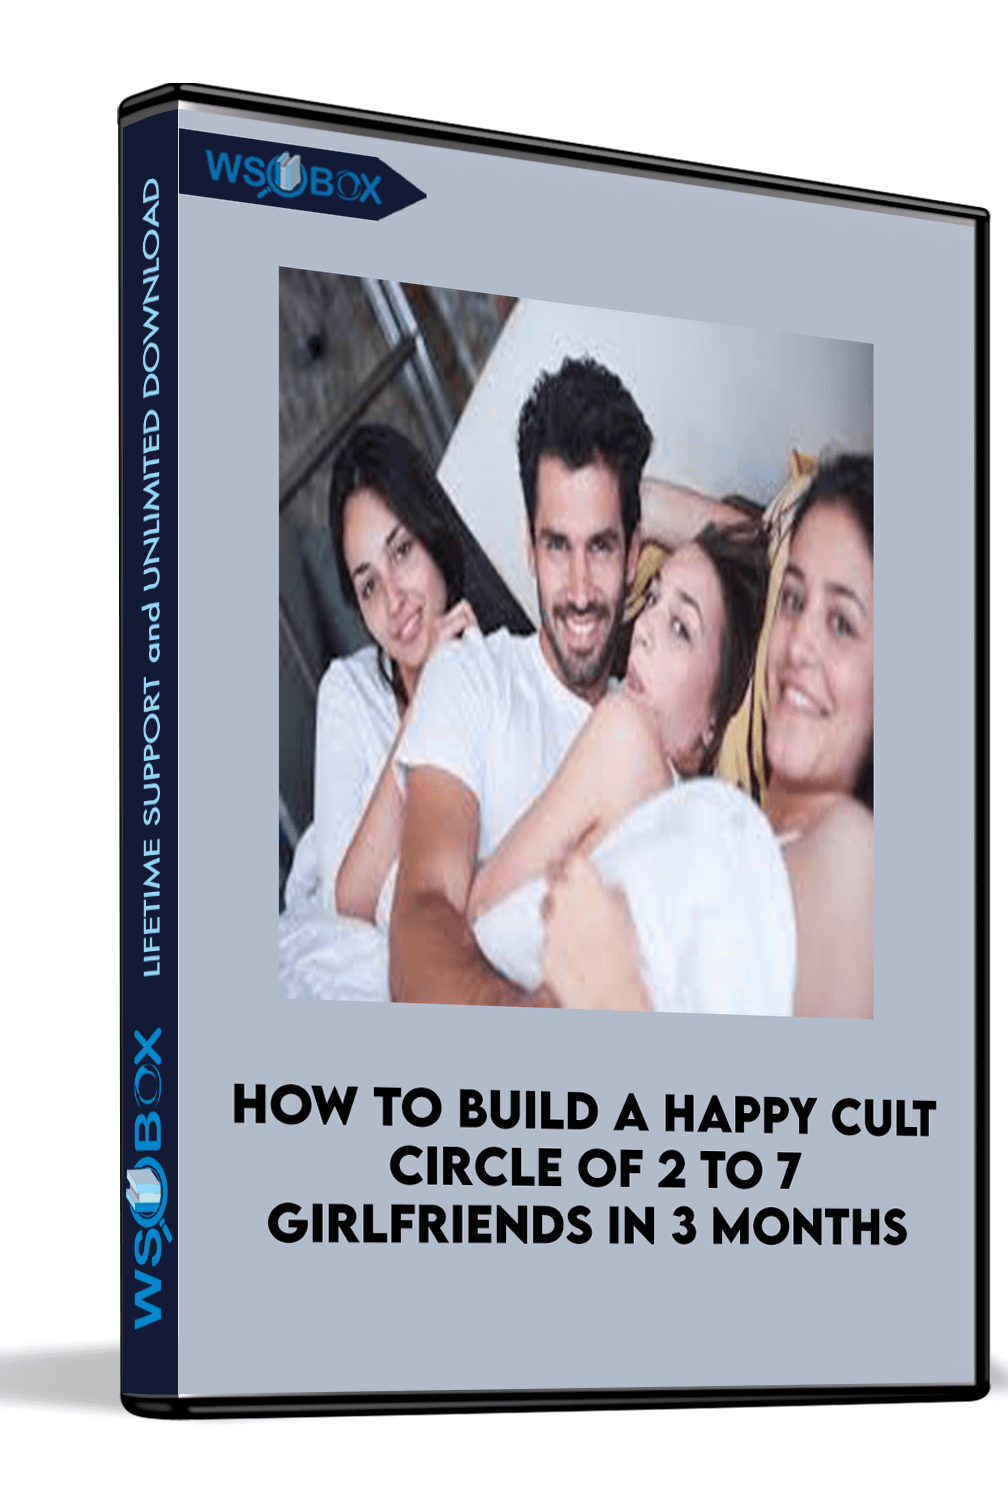 how-to-build-a-happy-cult-circle-of-2-to-7-girlfriends-in-3-months